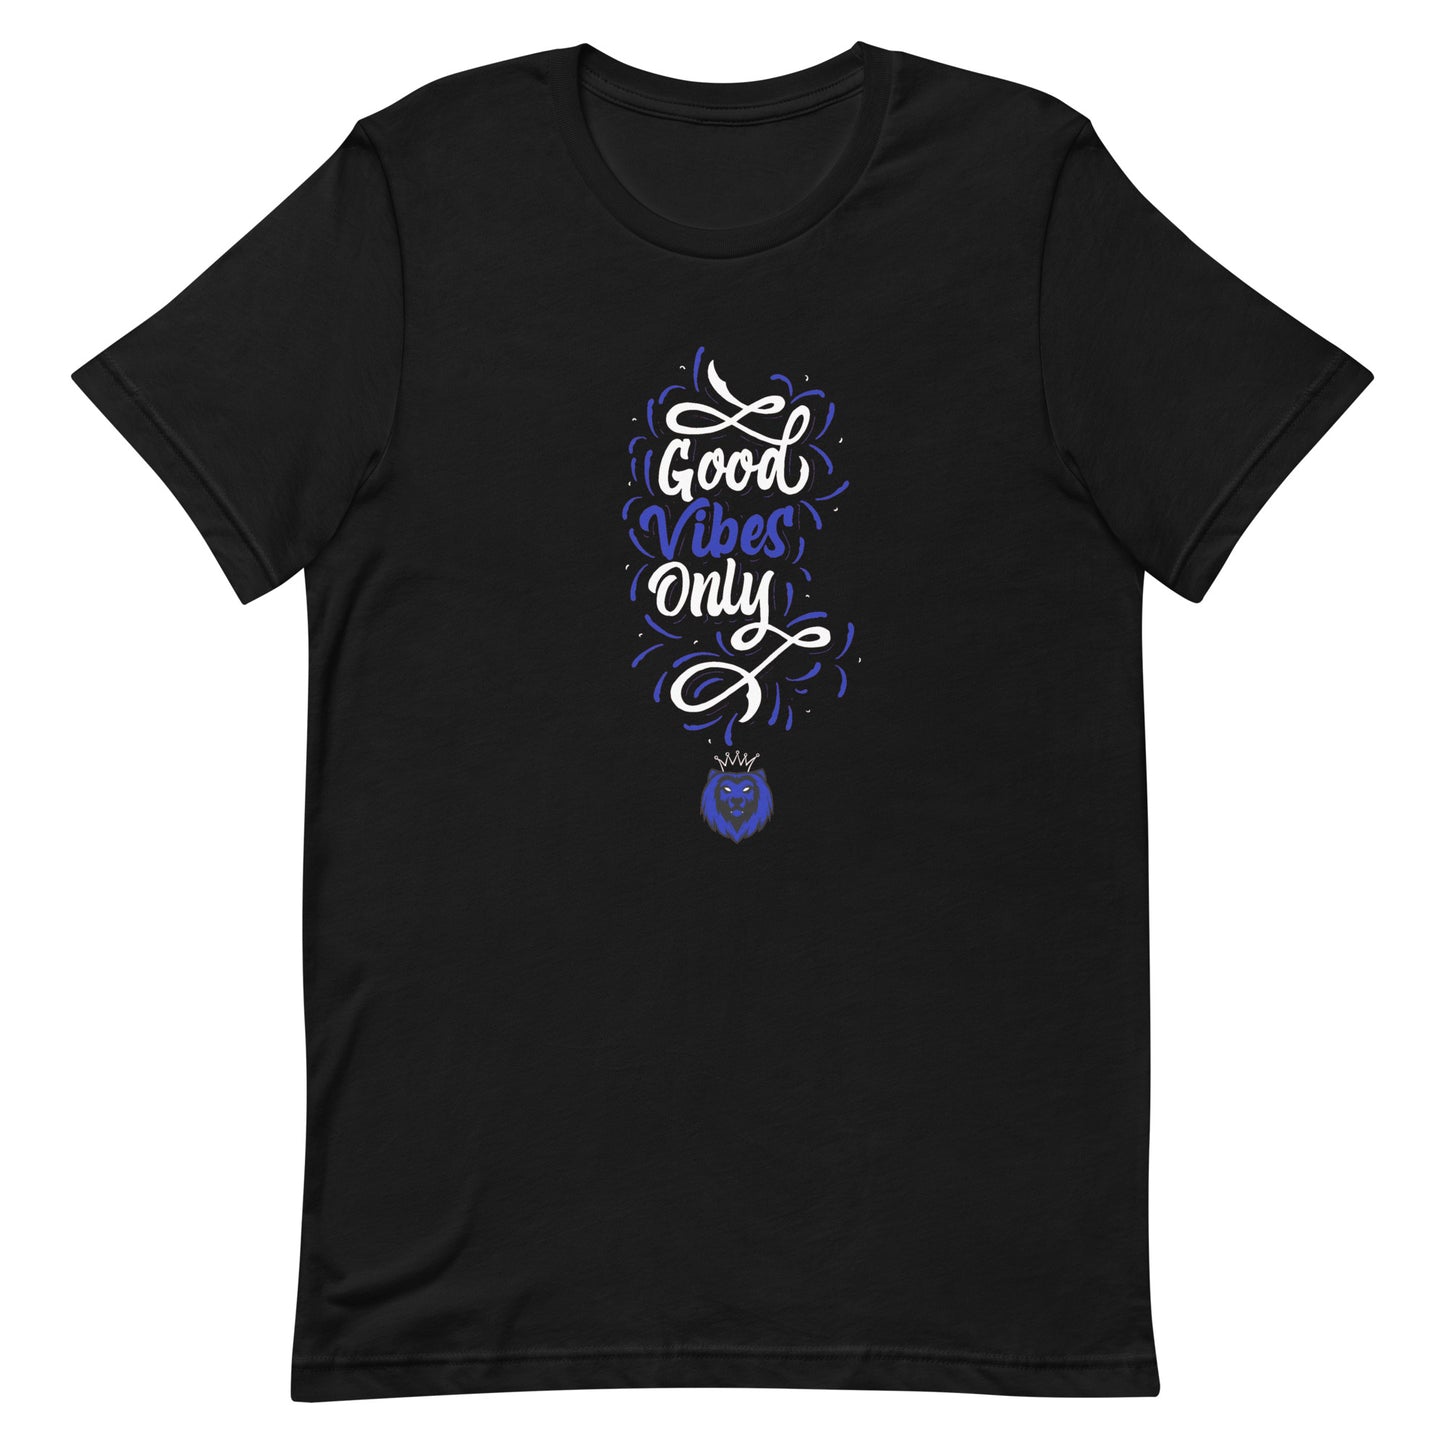 Good Vibes Only t-shirt